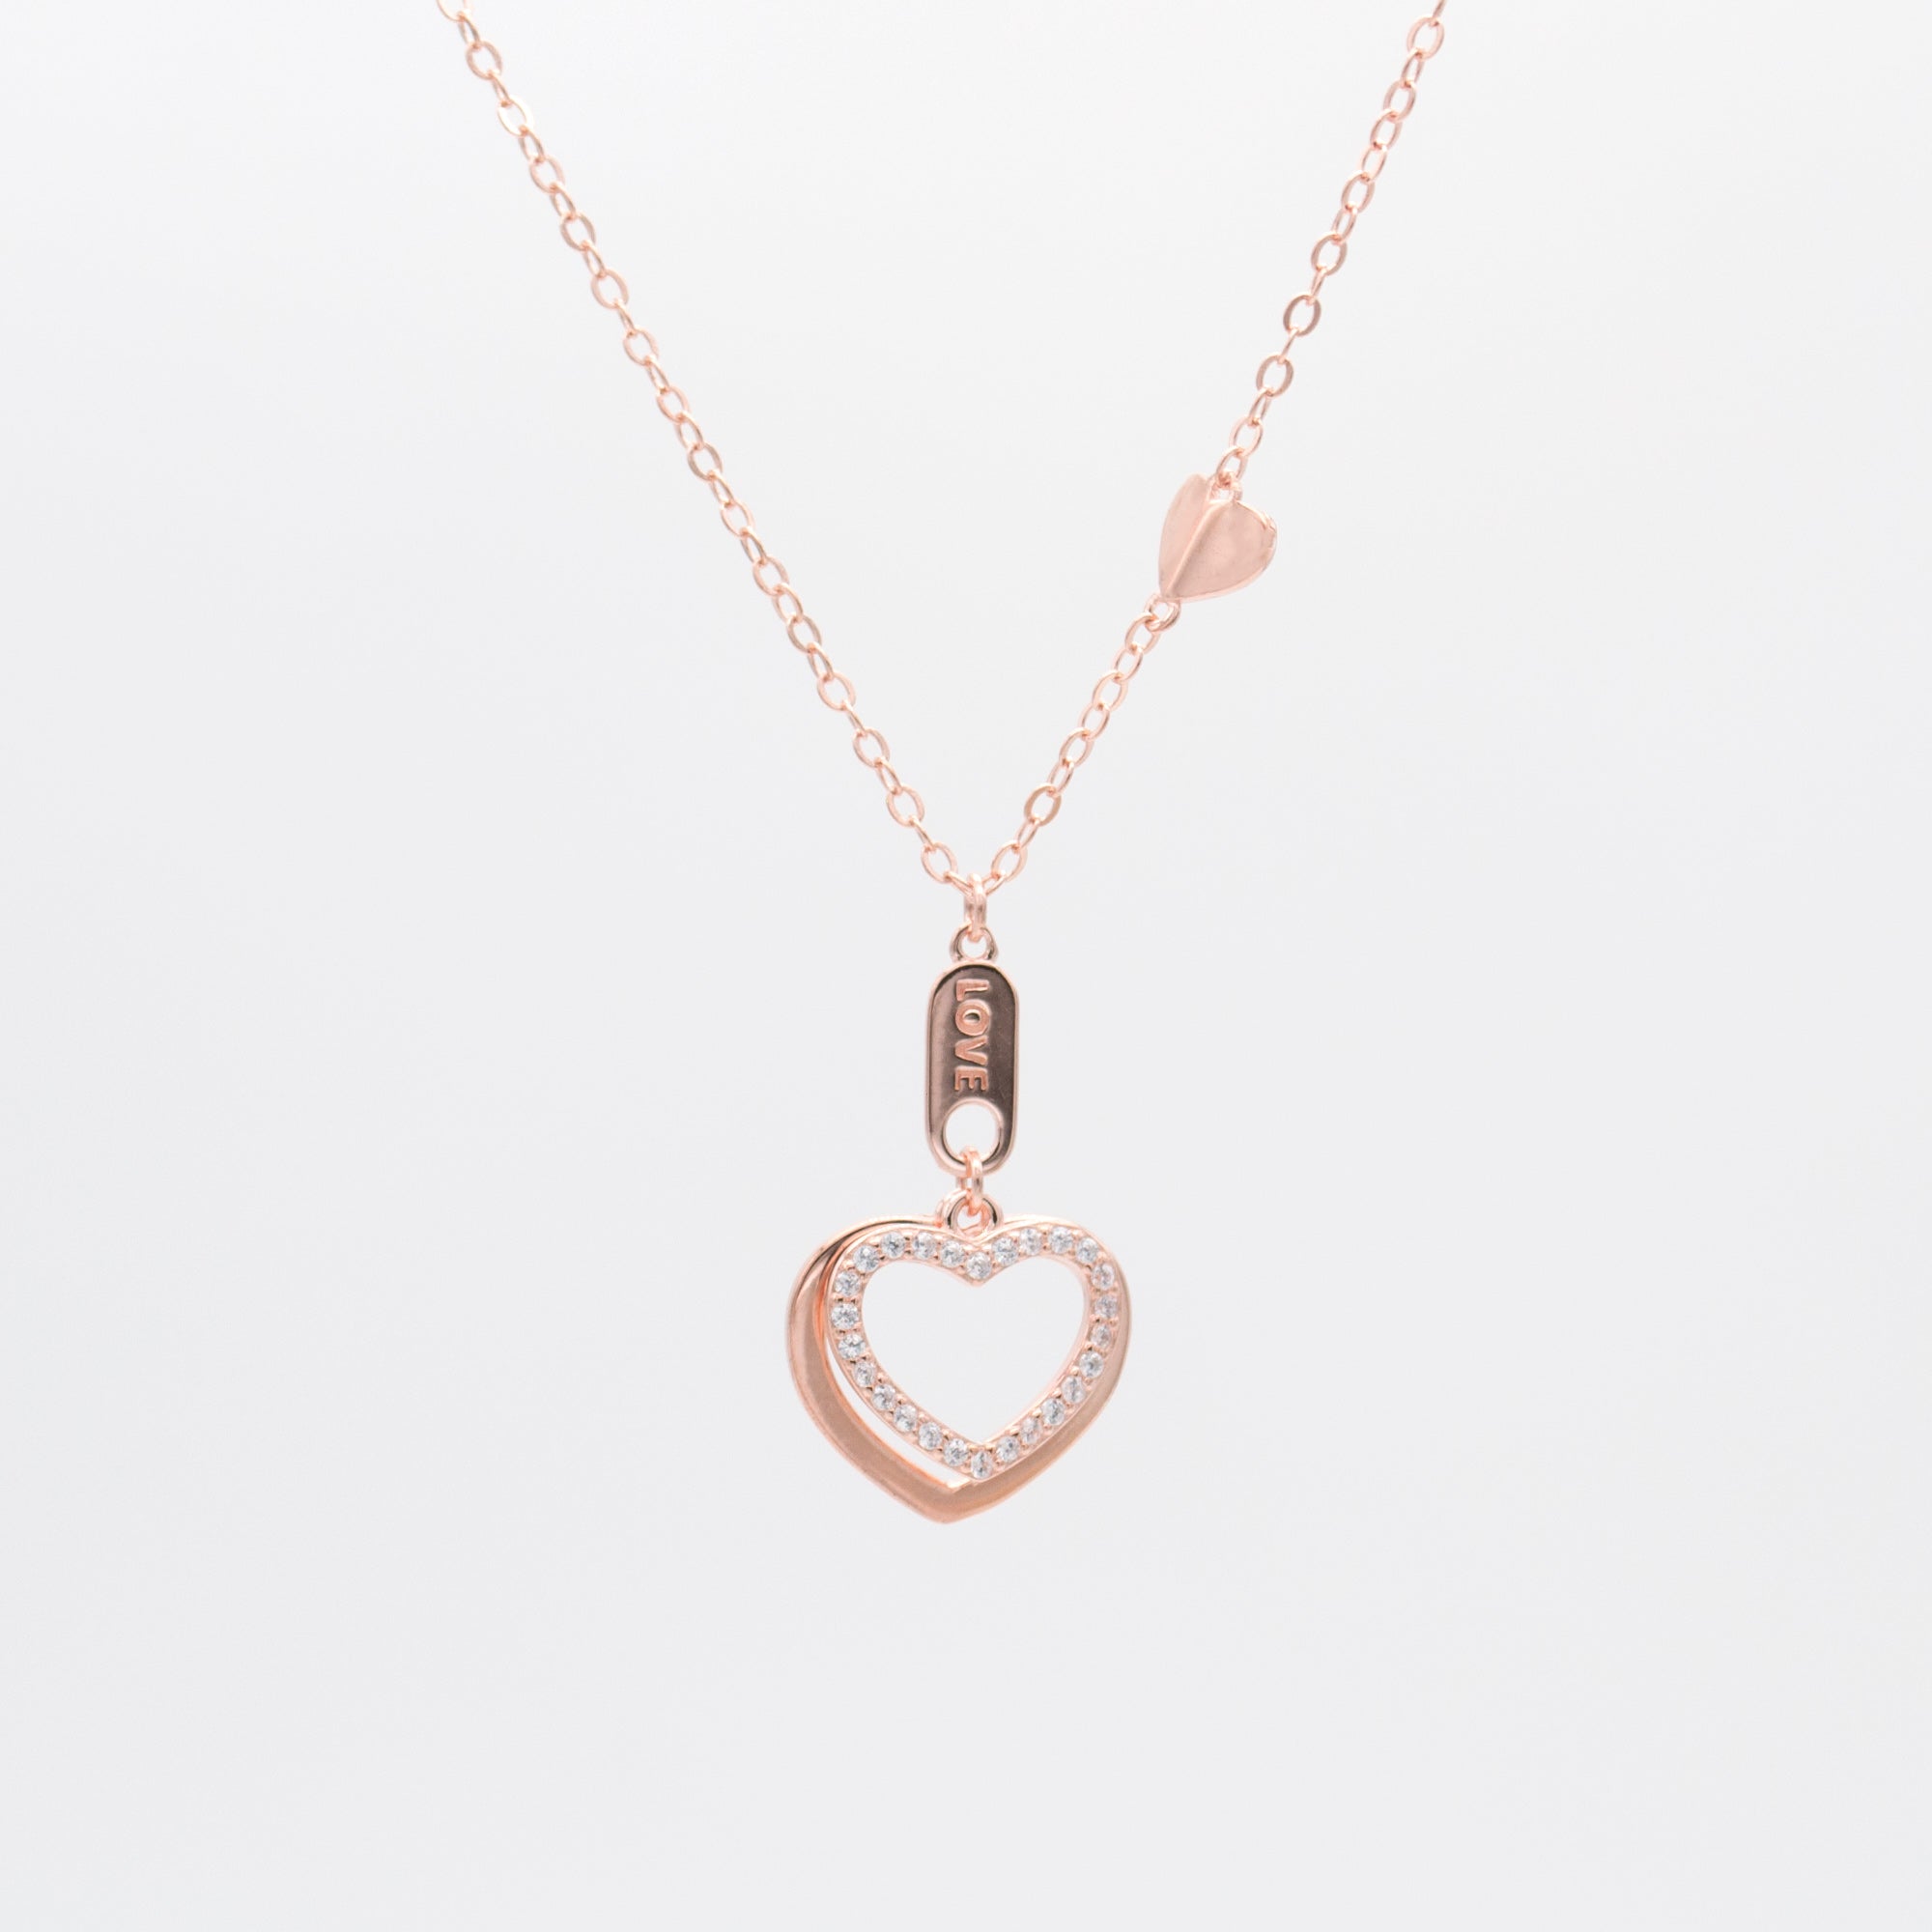 Jewdii 925 Sterling Silver Rose Gold Plated Heart Necklace